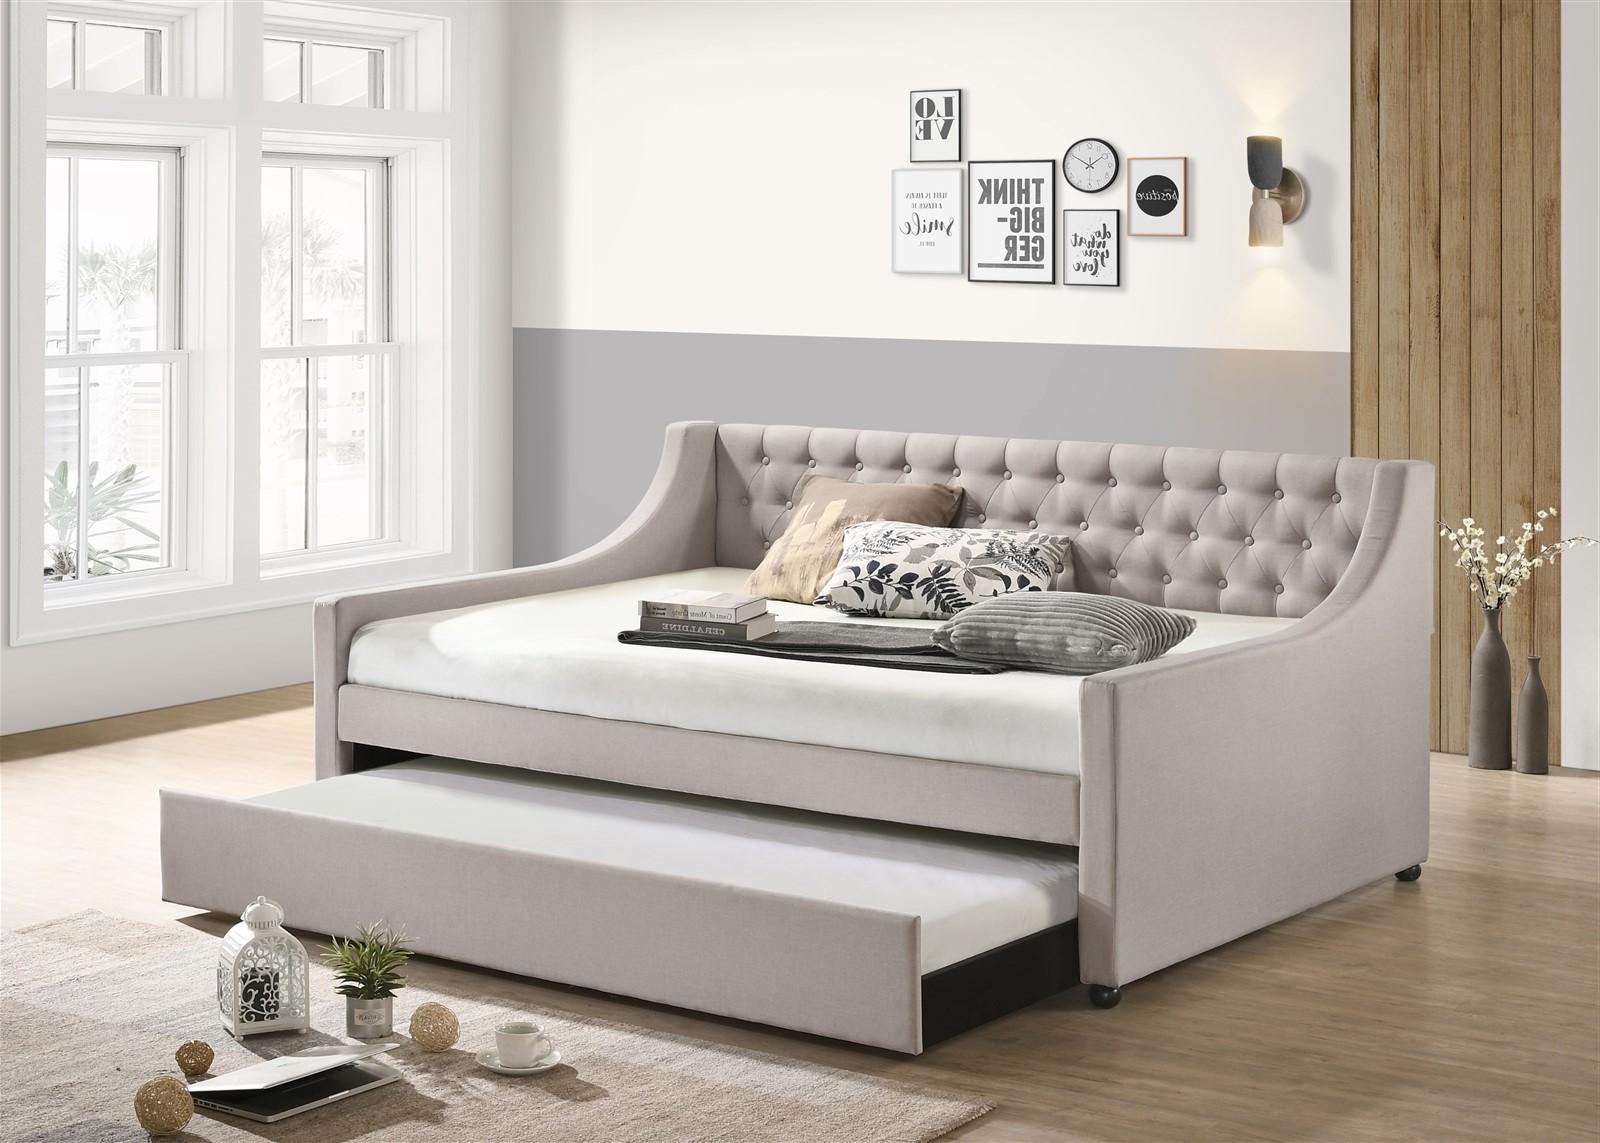 Transitional Daybed w/ trundle Lianna 39385 in Fog Fabric